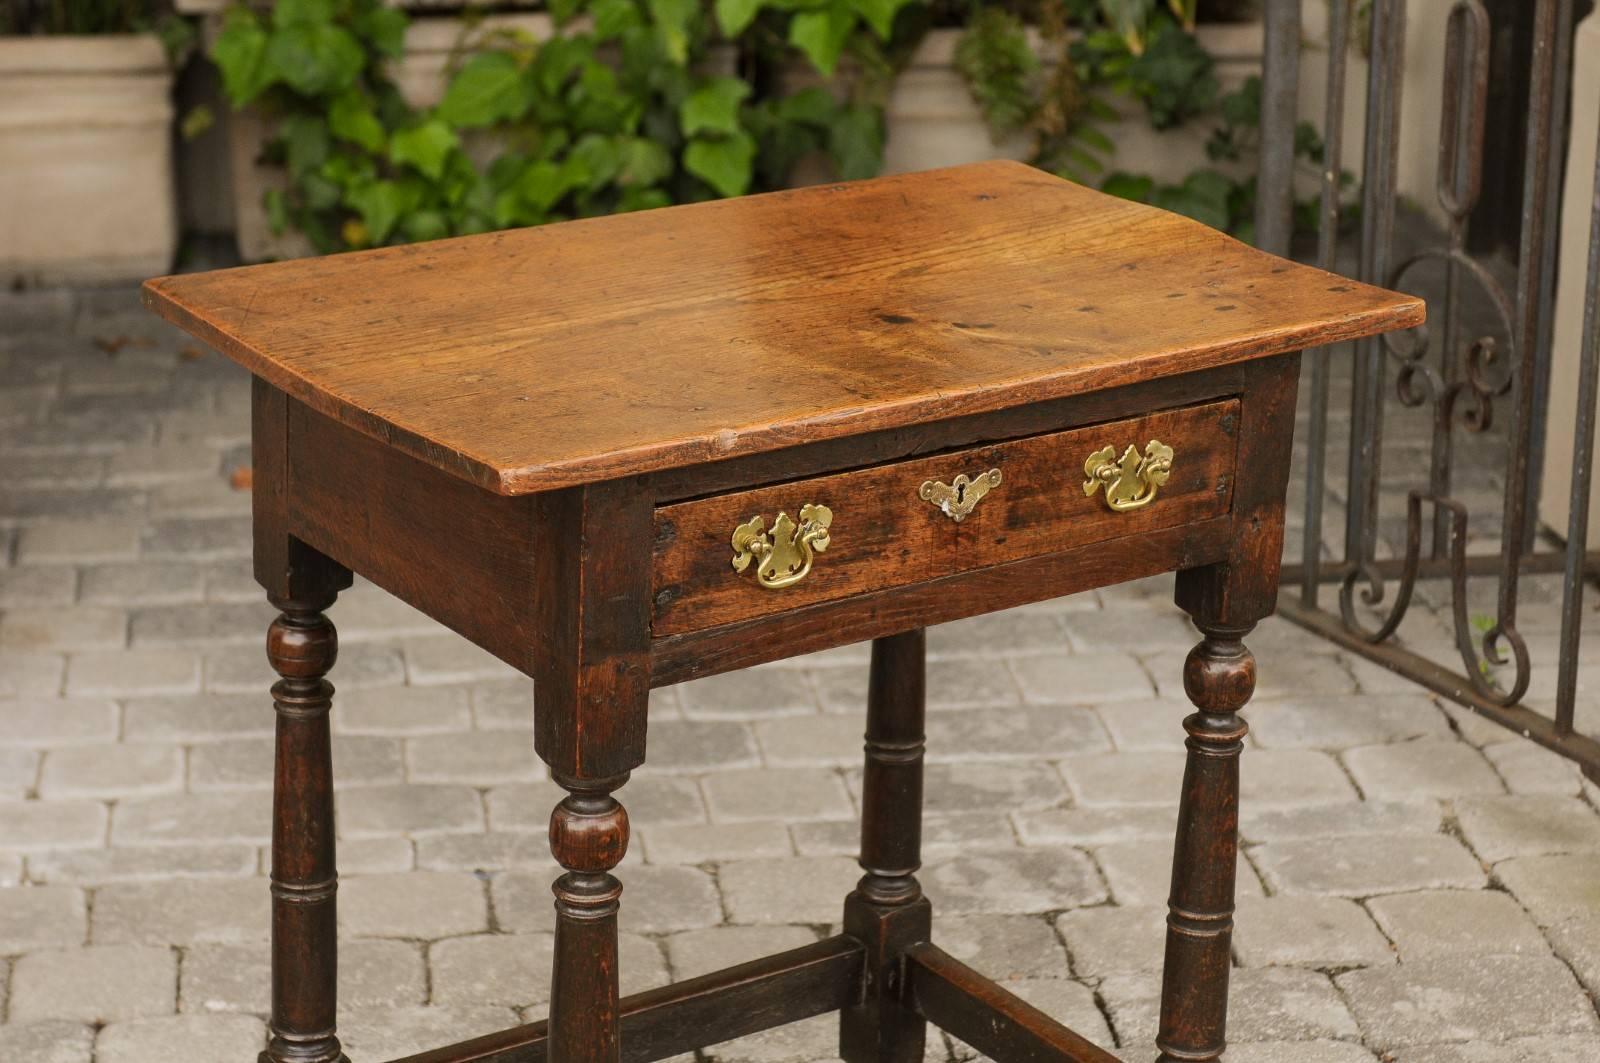 19th Century English 1850s Oak Side Table with Drawer, Brass Hardware and Turned Legs